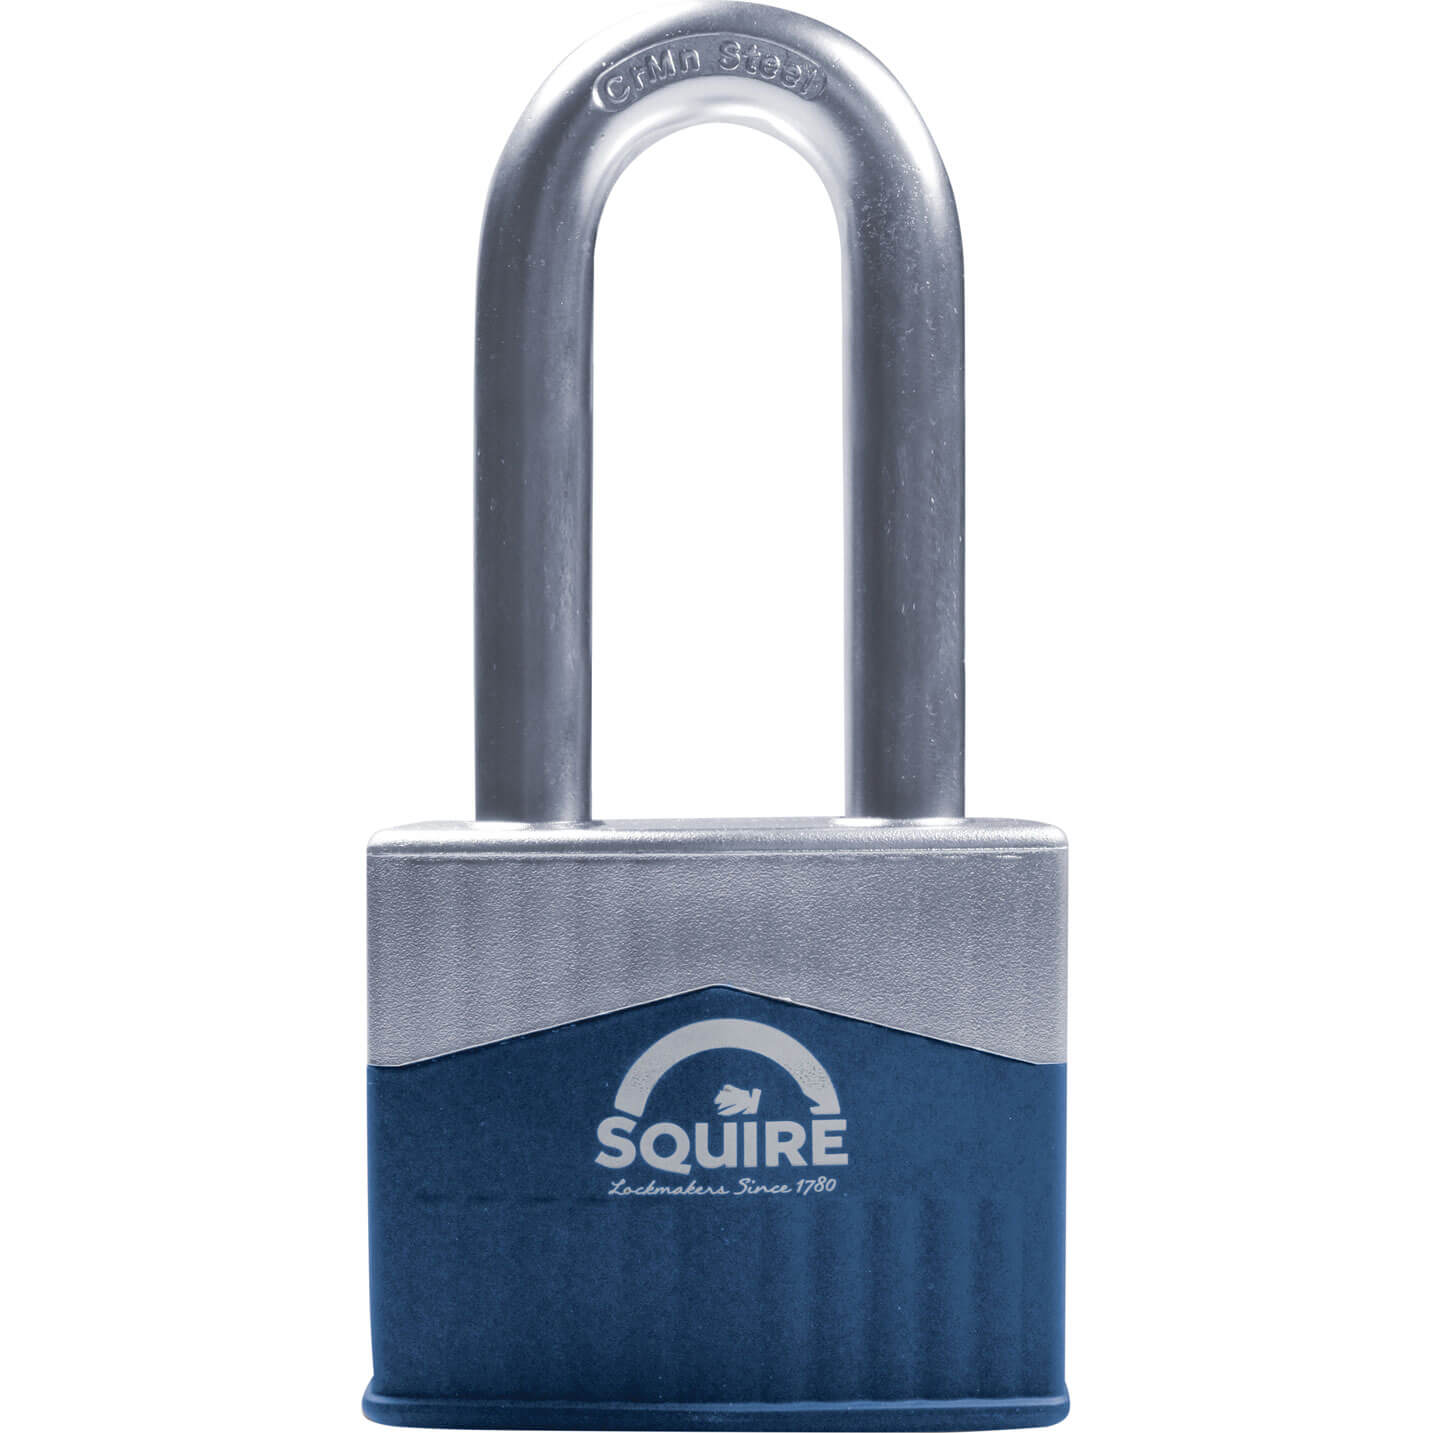 Image of Henry Squire Warrior High-Security Shackle Padlock 65mm Long